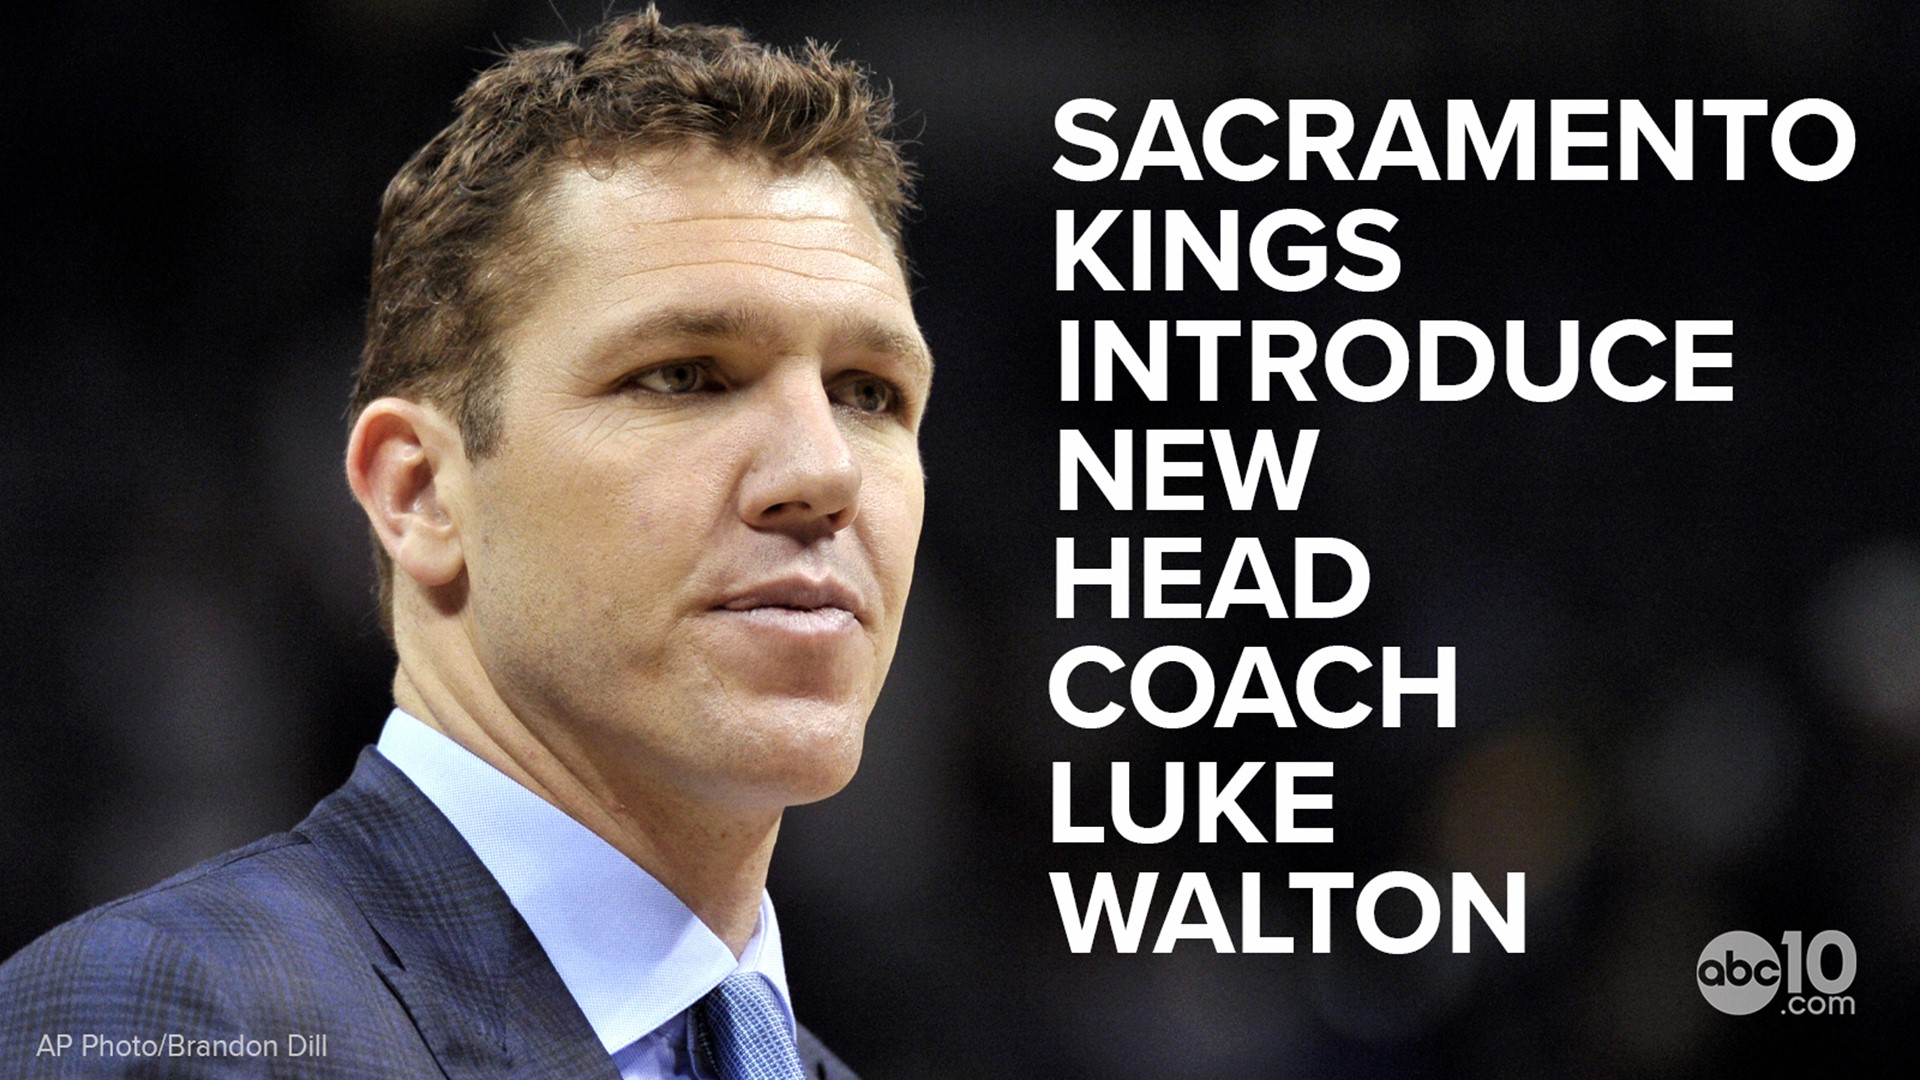 Luke Walton answers questions for the first time as the new head coach for the Sacramento Kings. Walton talks about what he expects with his new team and GM Vlade Divac explains why he feels Luke Walton is the best choice to lead the Kings.